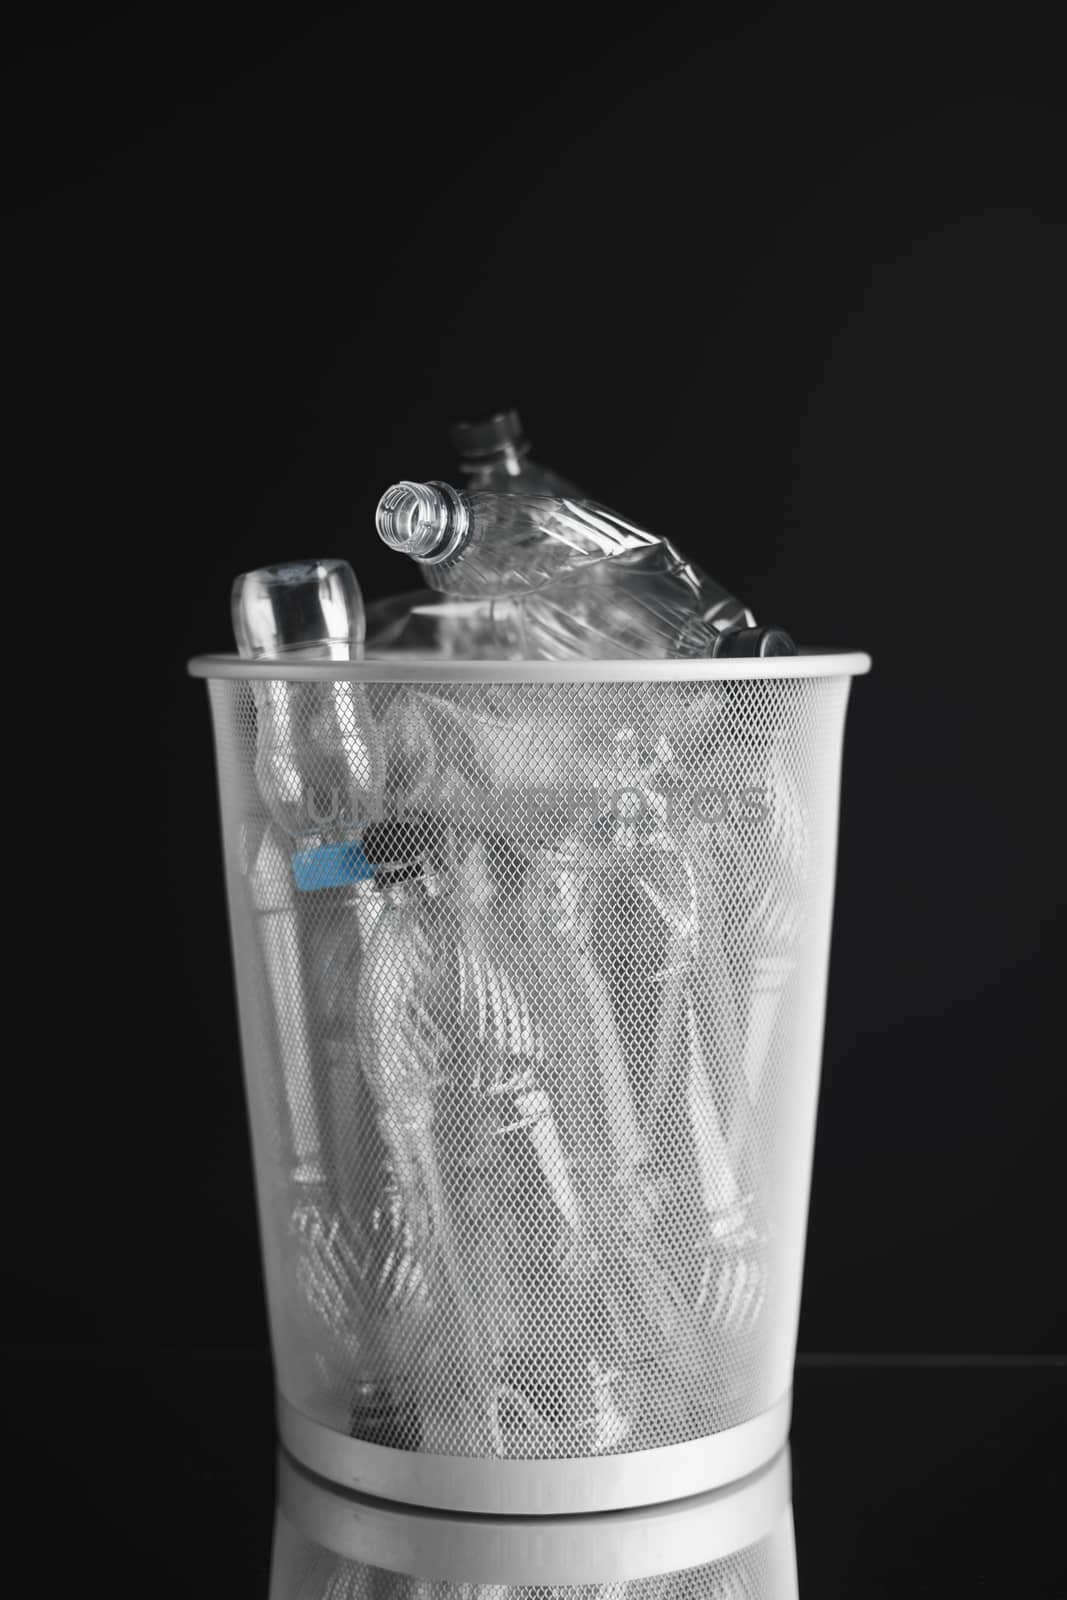 trash can with wasted plastic bottles, black background by nikkytok